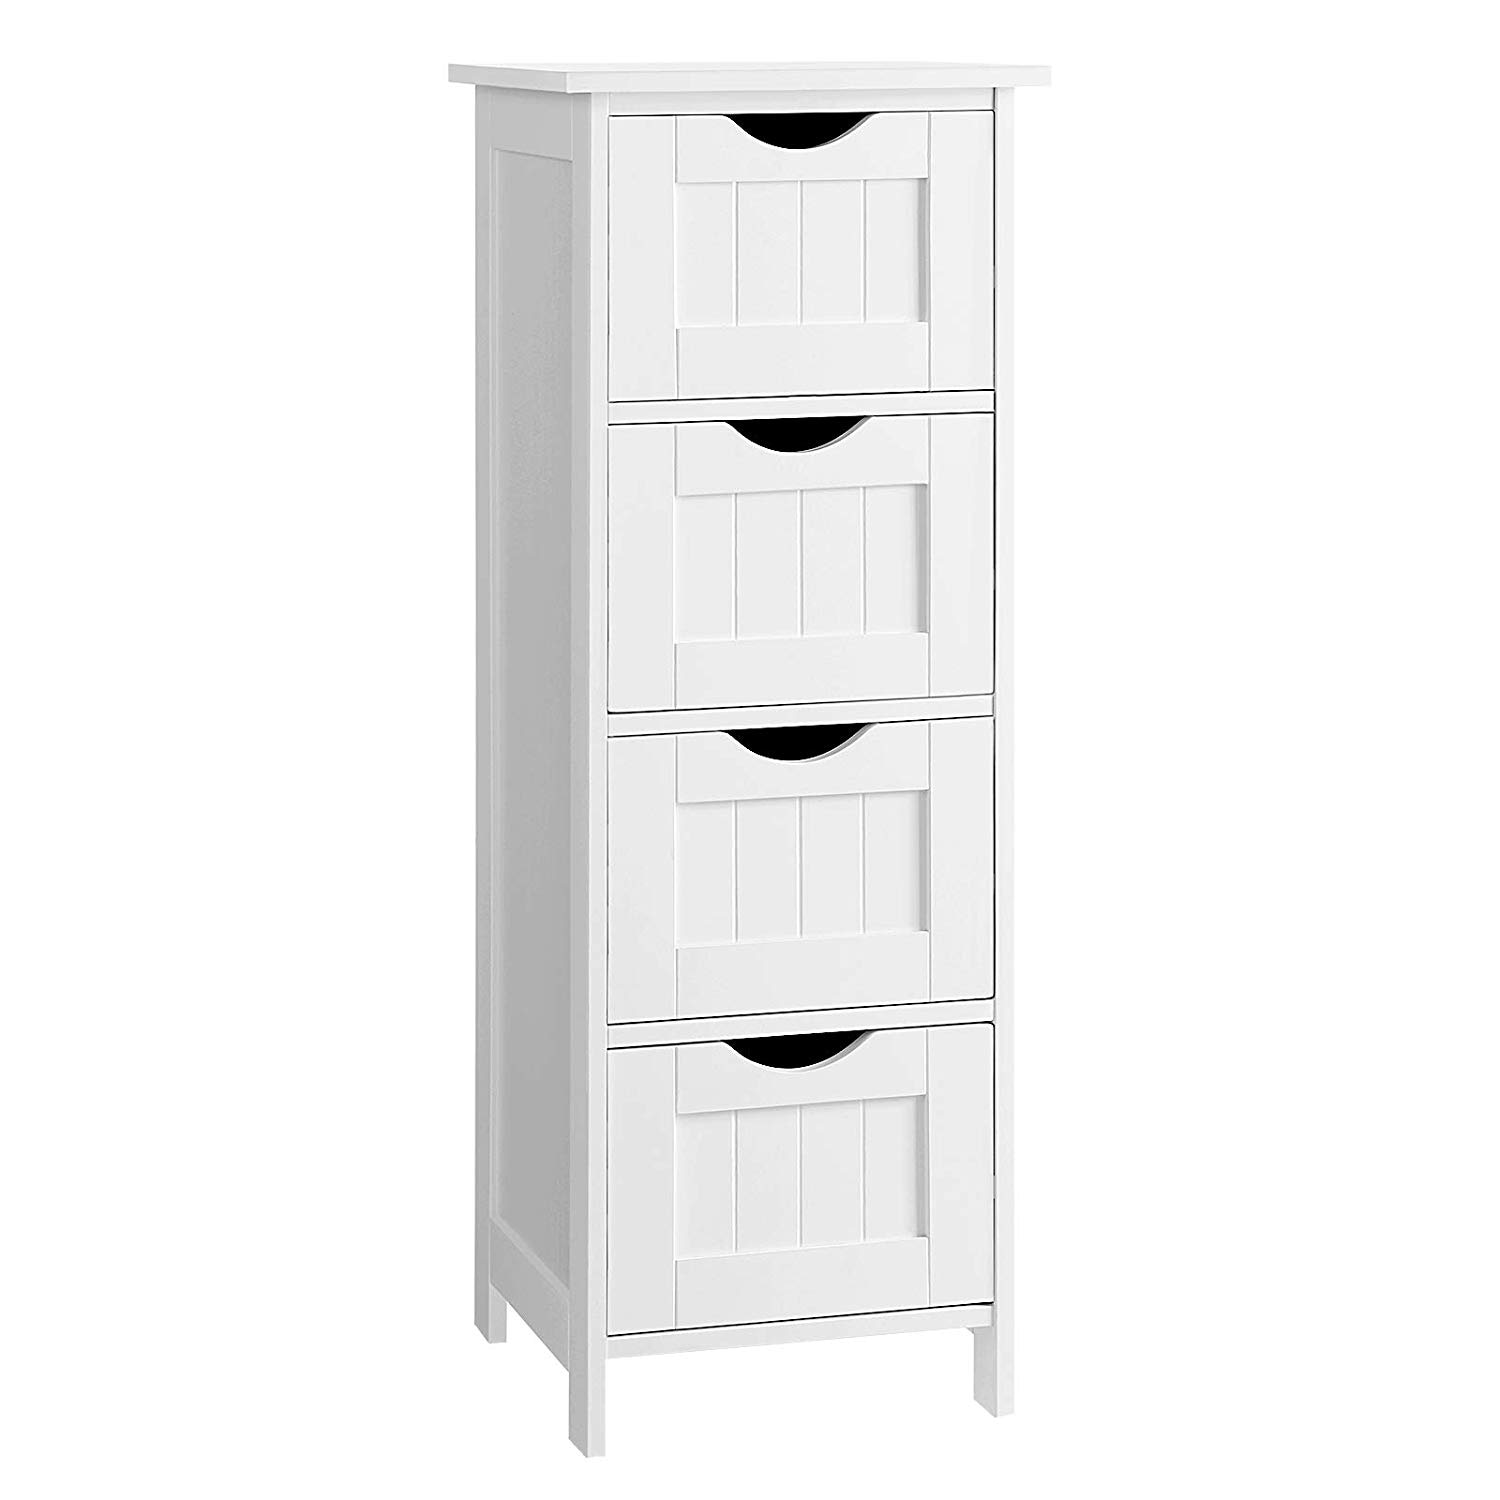 https://ak1.ostkcdn.com/images/products/is/images/direct/5ed8bef5ffb9225a492883d8454c770e39ec01e4/White-Bathroom-Storage-Cabinet.jpg